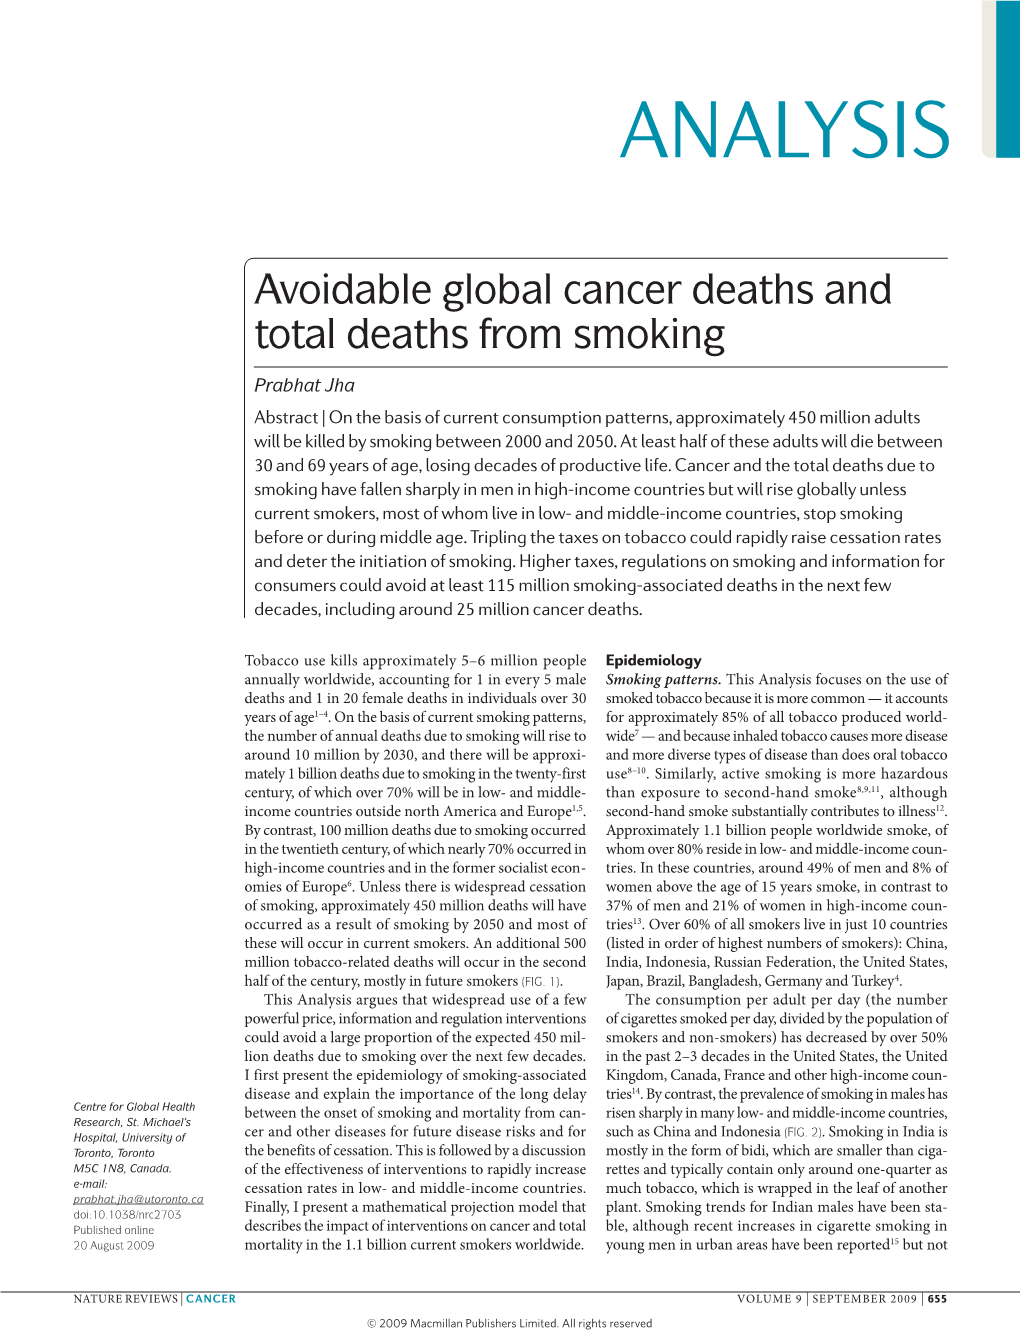 Avoidable Global Cancer Deaths and Total Deaths from Smoking